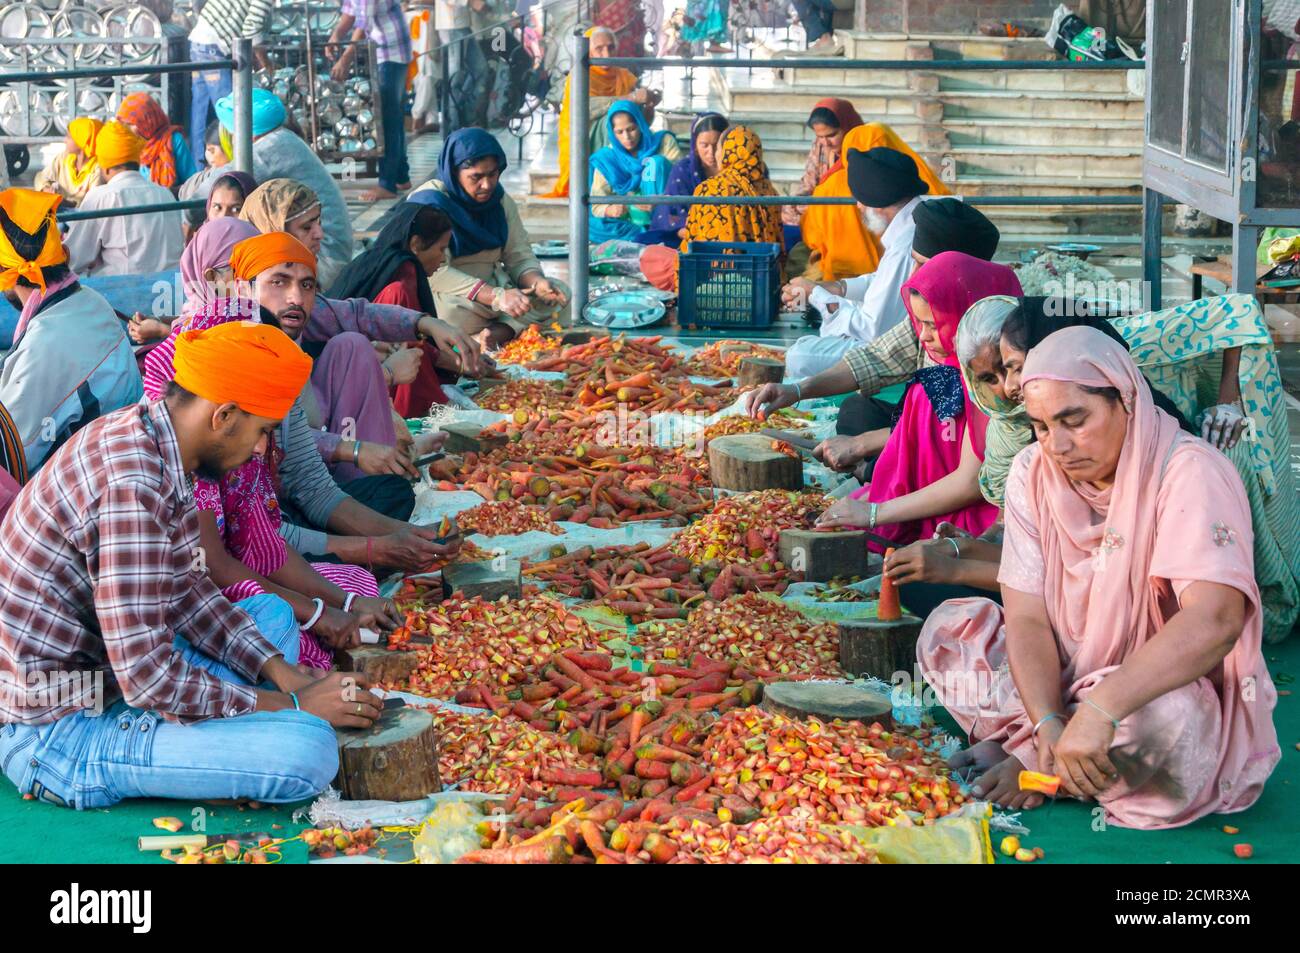 Amritsar, India - November 21, 2011: Unknown Indian people peel vegetables for a free meal for pilgrims. Golden Temple in Amritsar, Punjab, India. Stock Photo